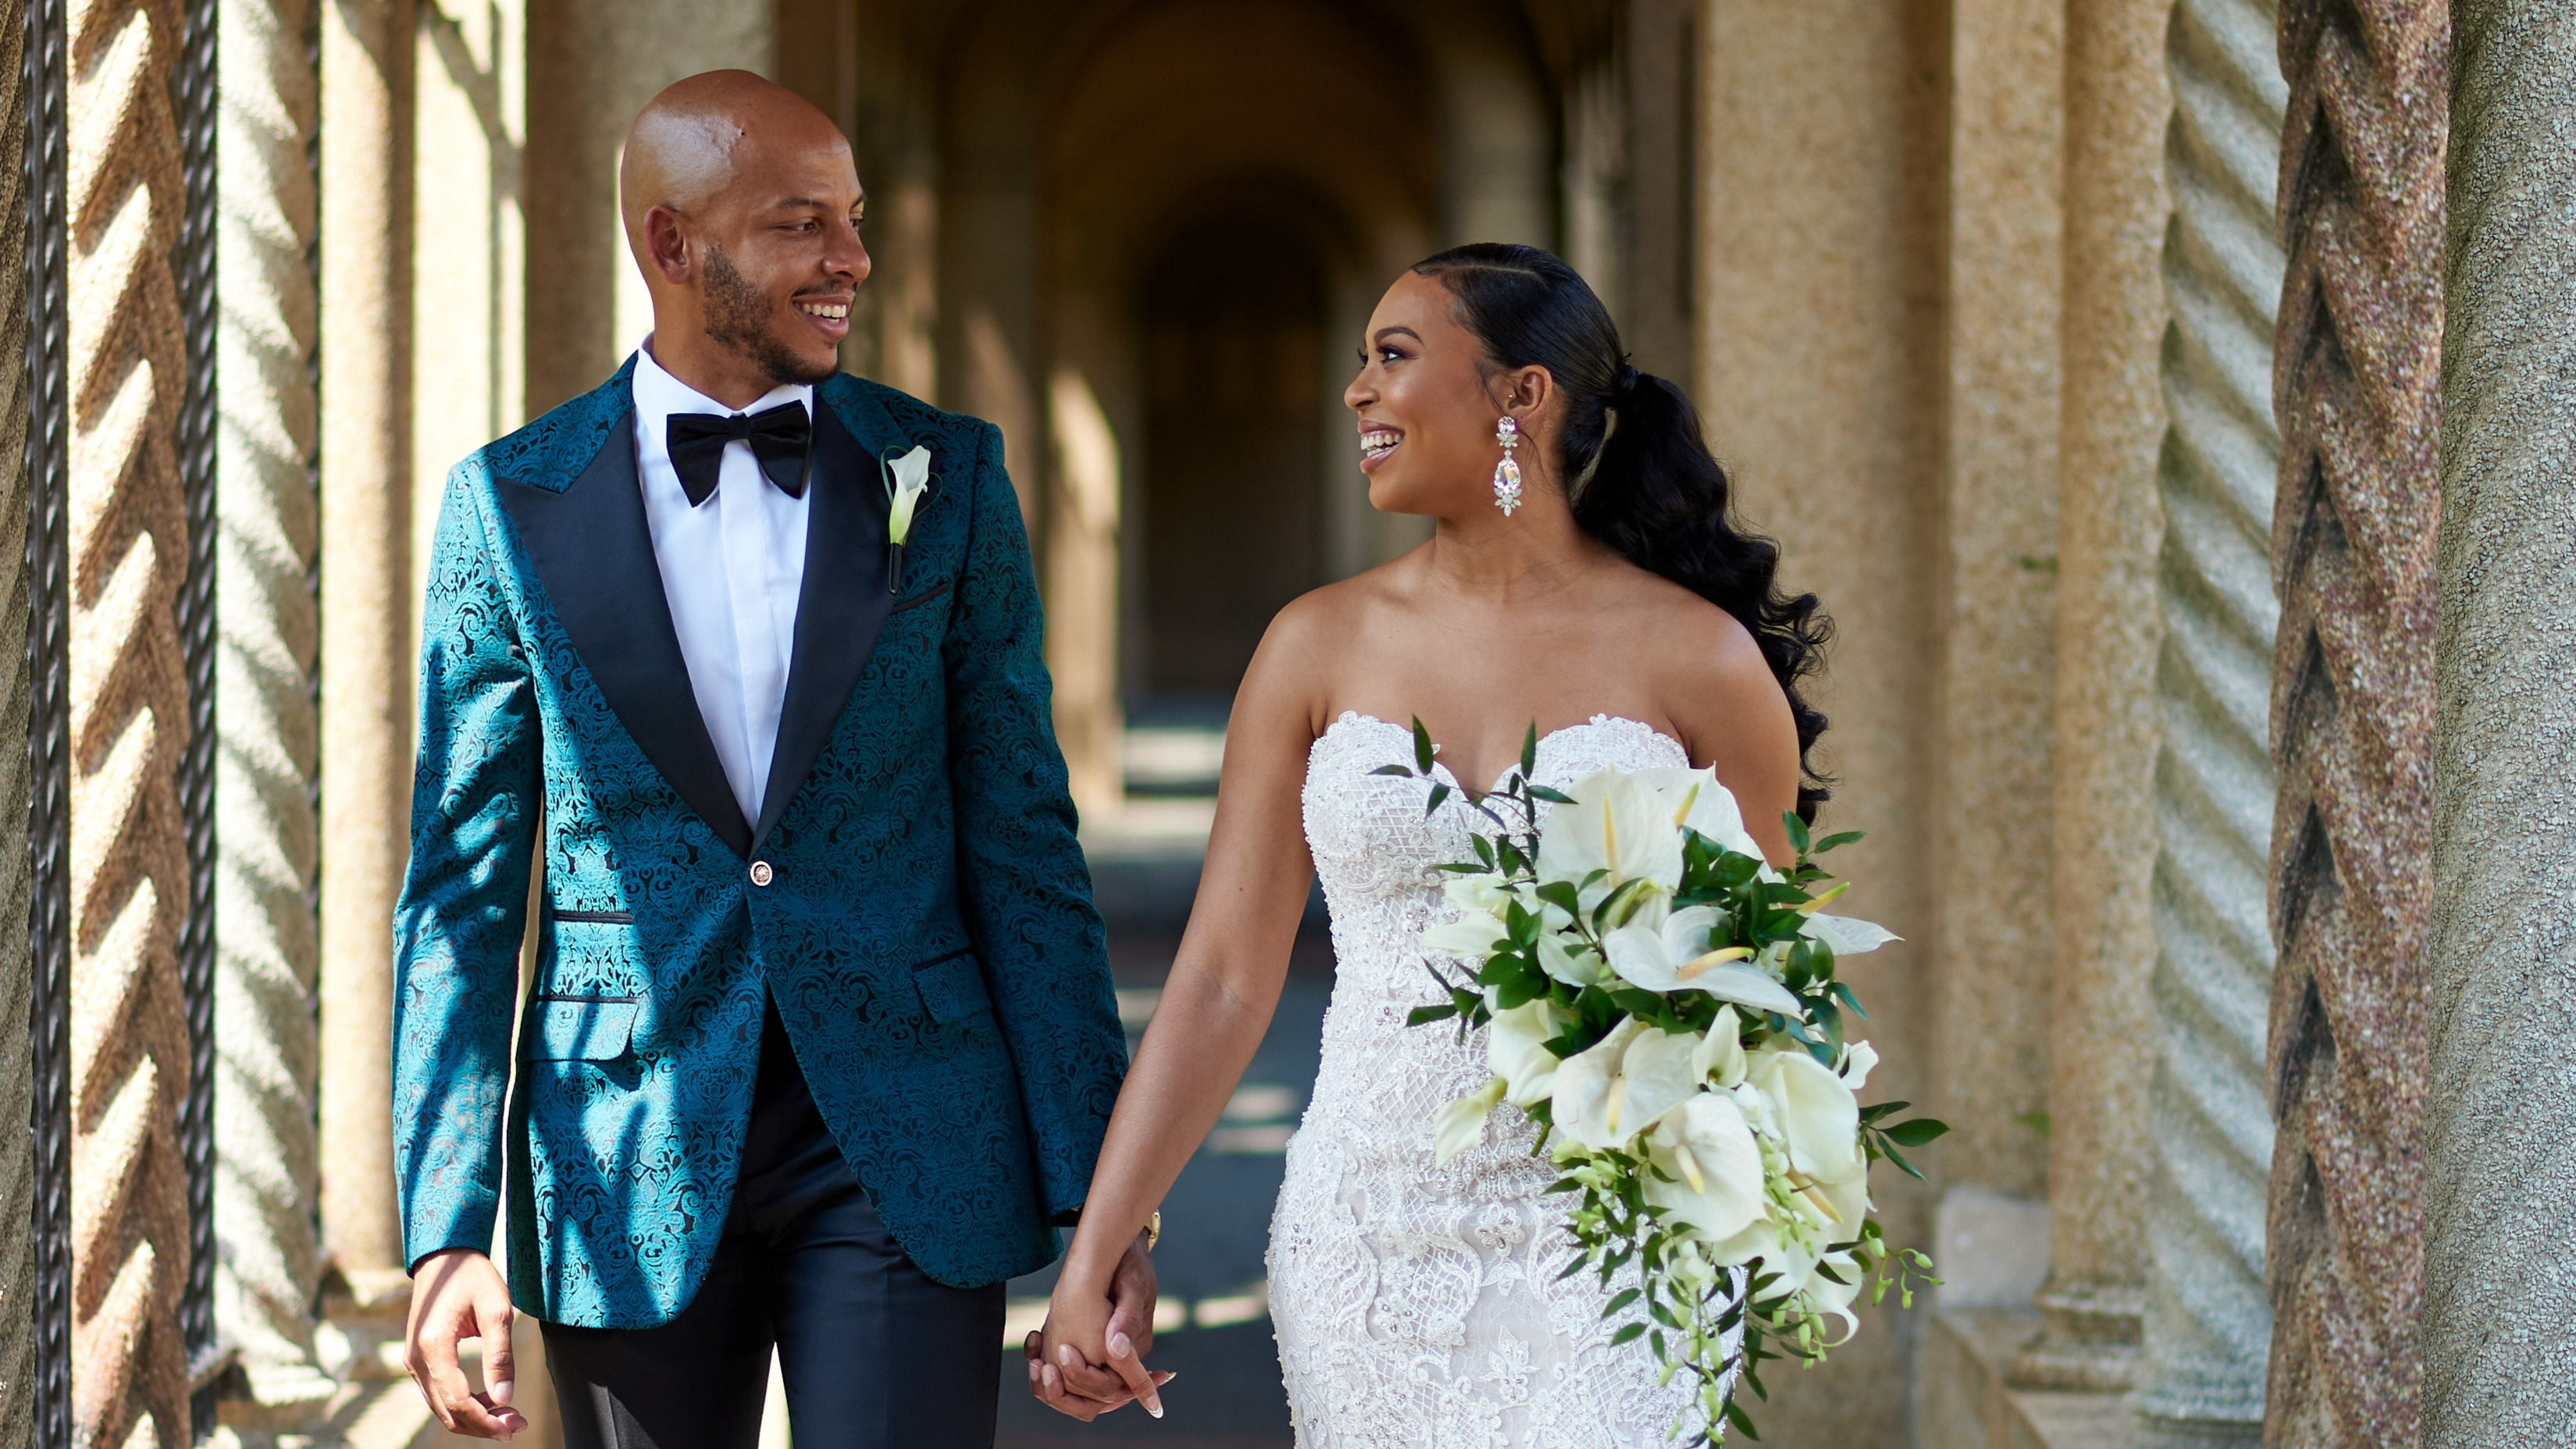 ft.com - Imani Moise - US couples ask wedding guests for help with mortgage downpayments